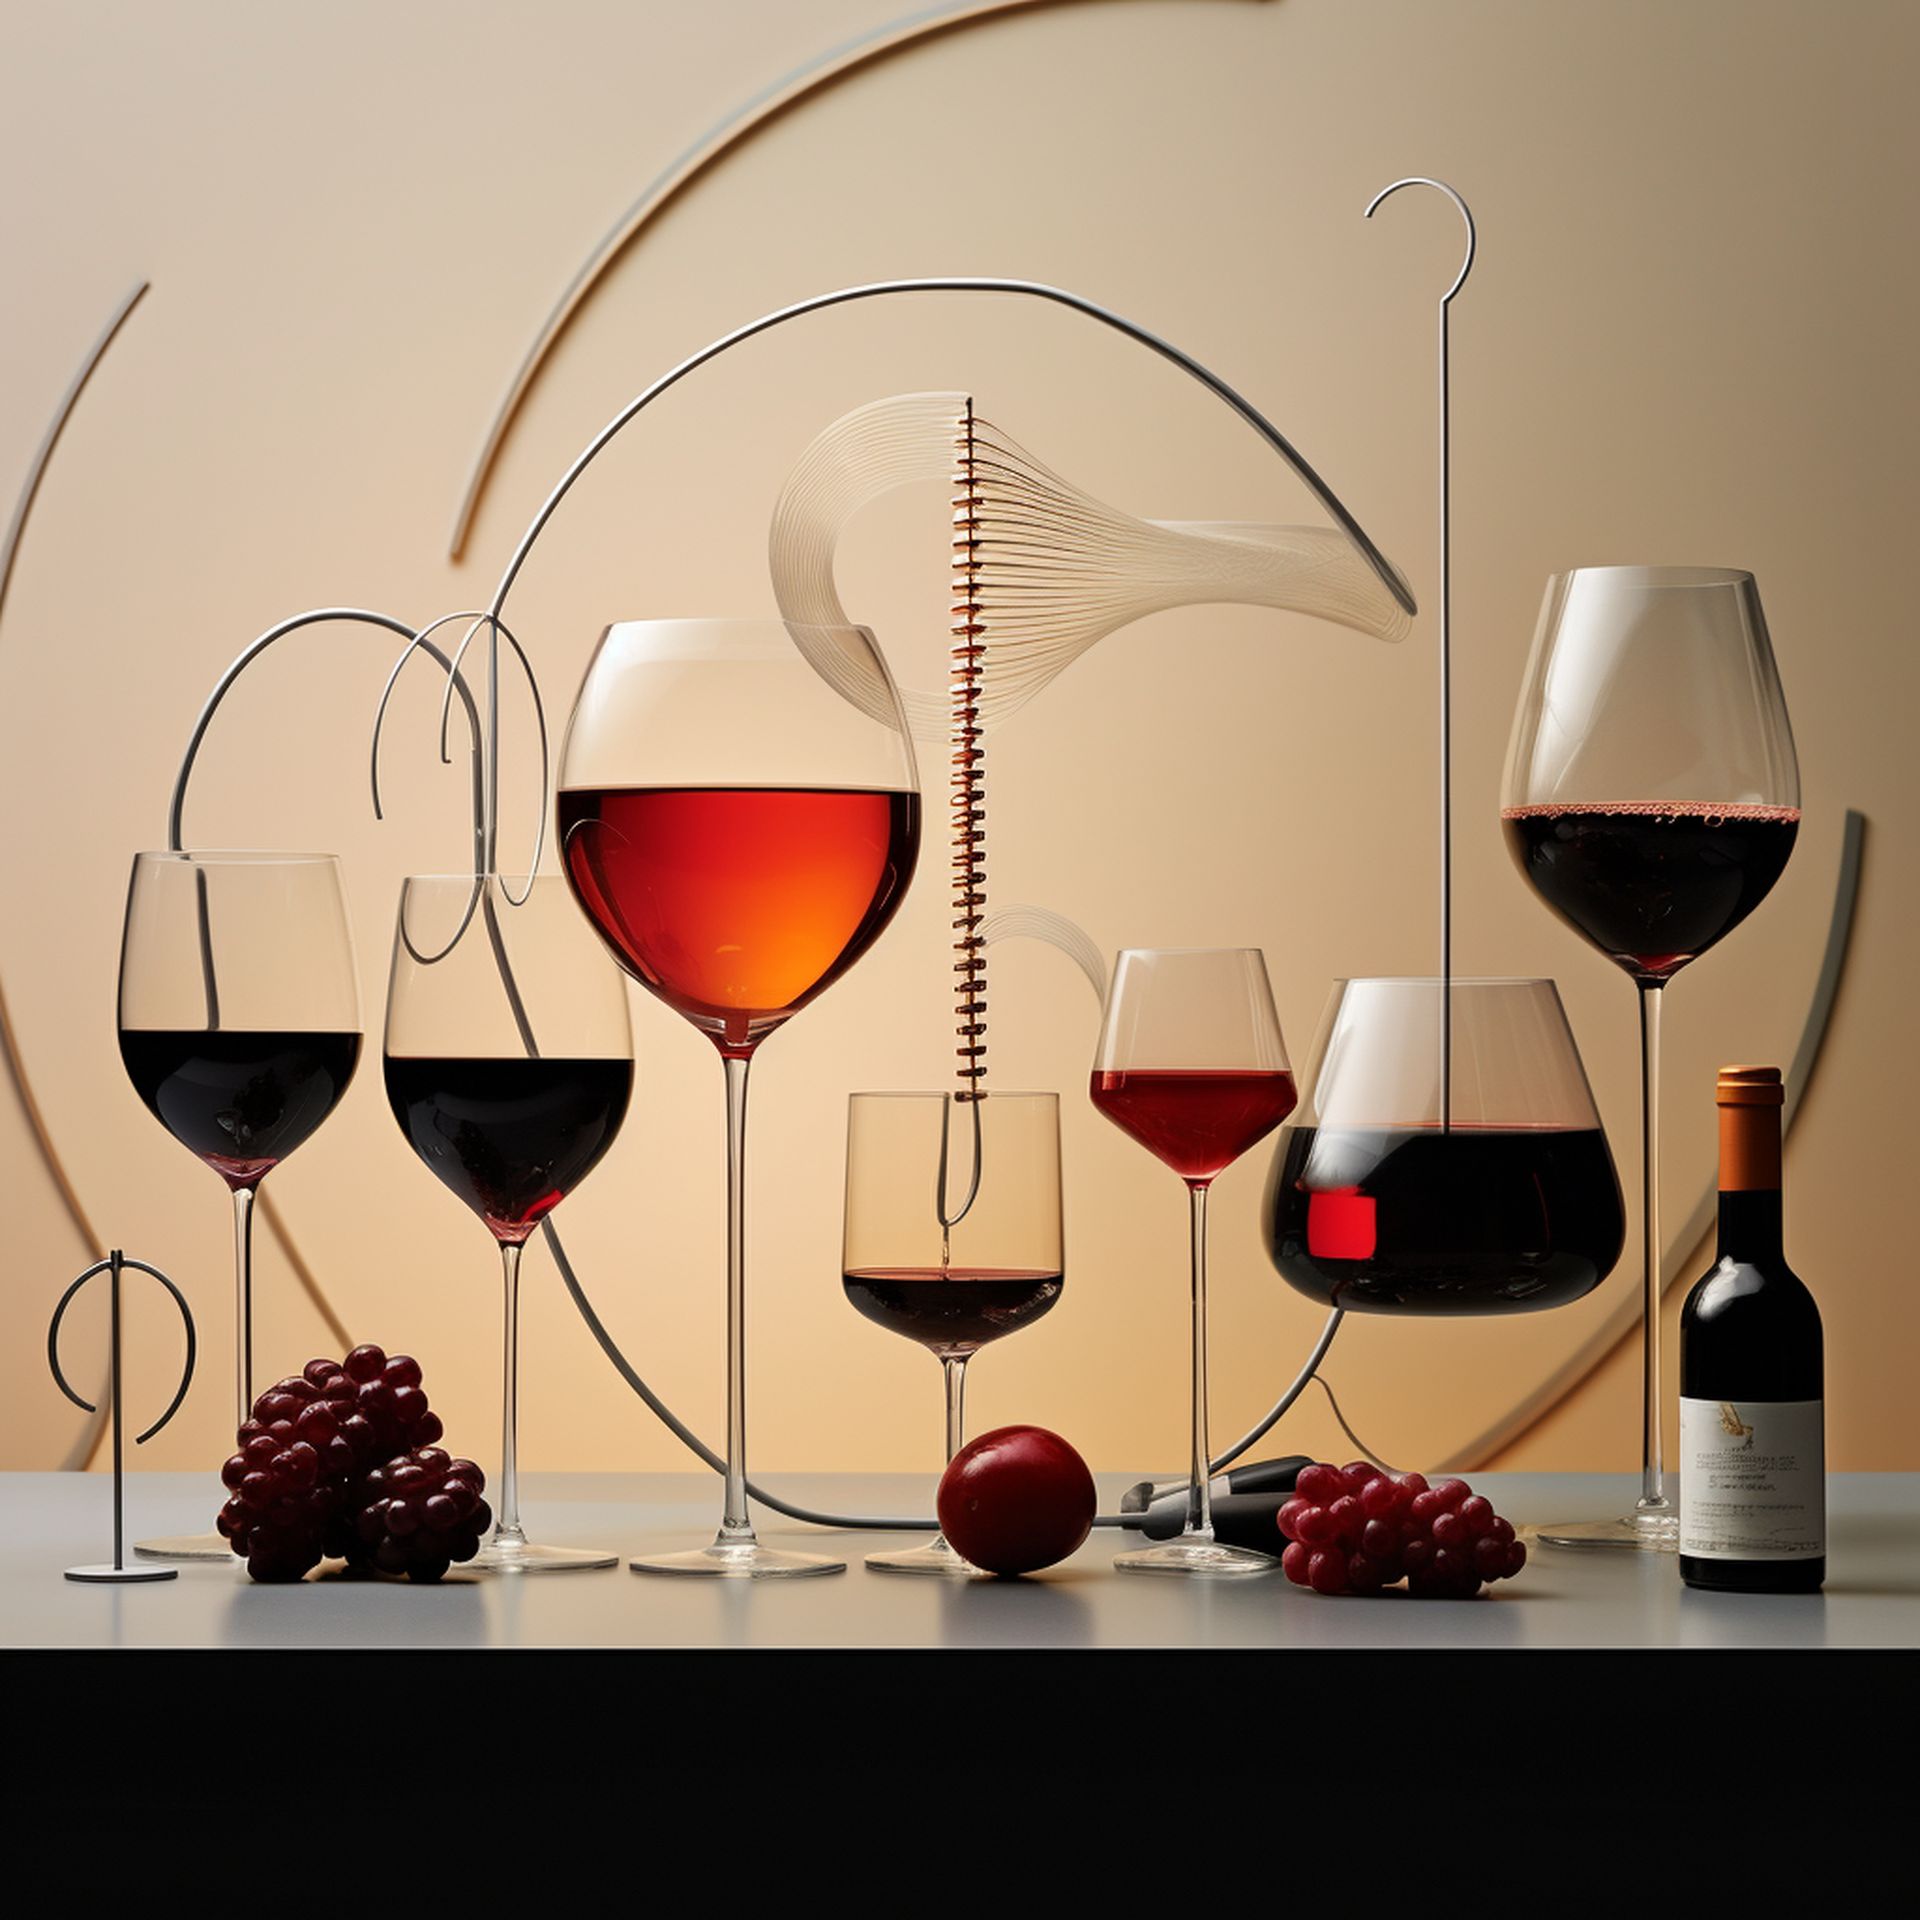 an artistic representation of different wine glass shapes, each paired with a specific wine type. The image emphasizes the scientific rationale behind each design, set in a modern laboratory-like setting with annotations.